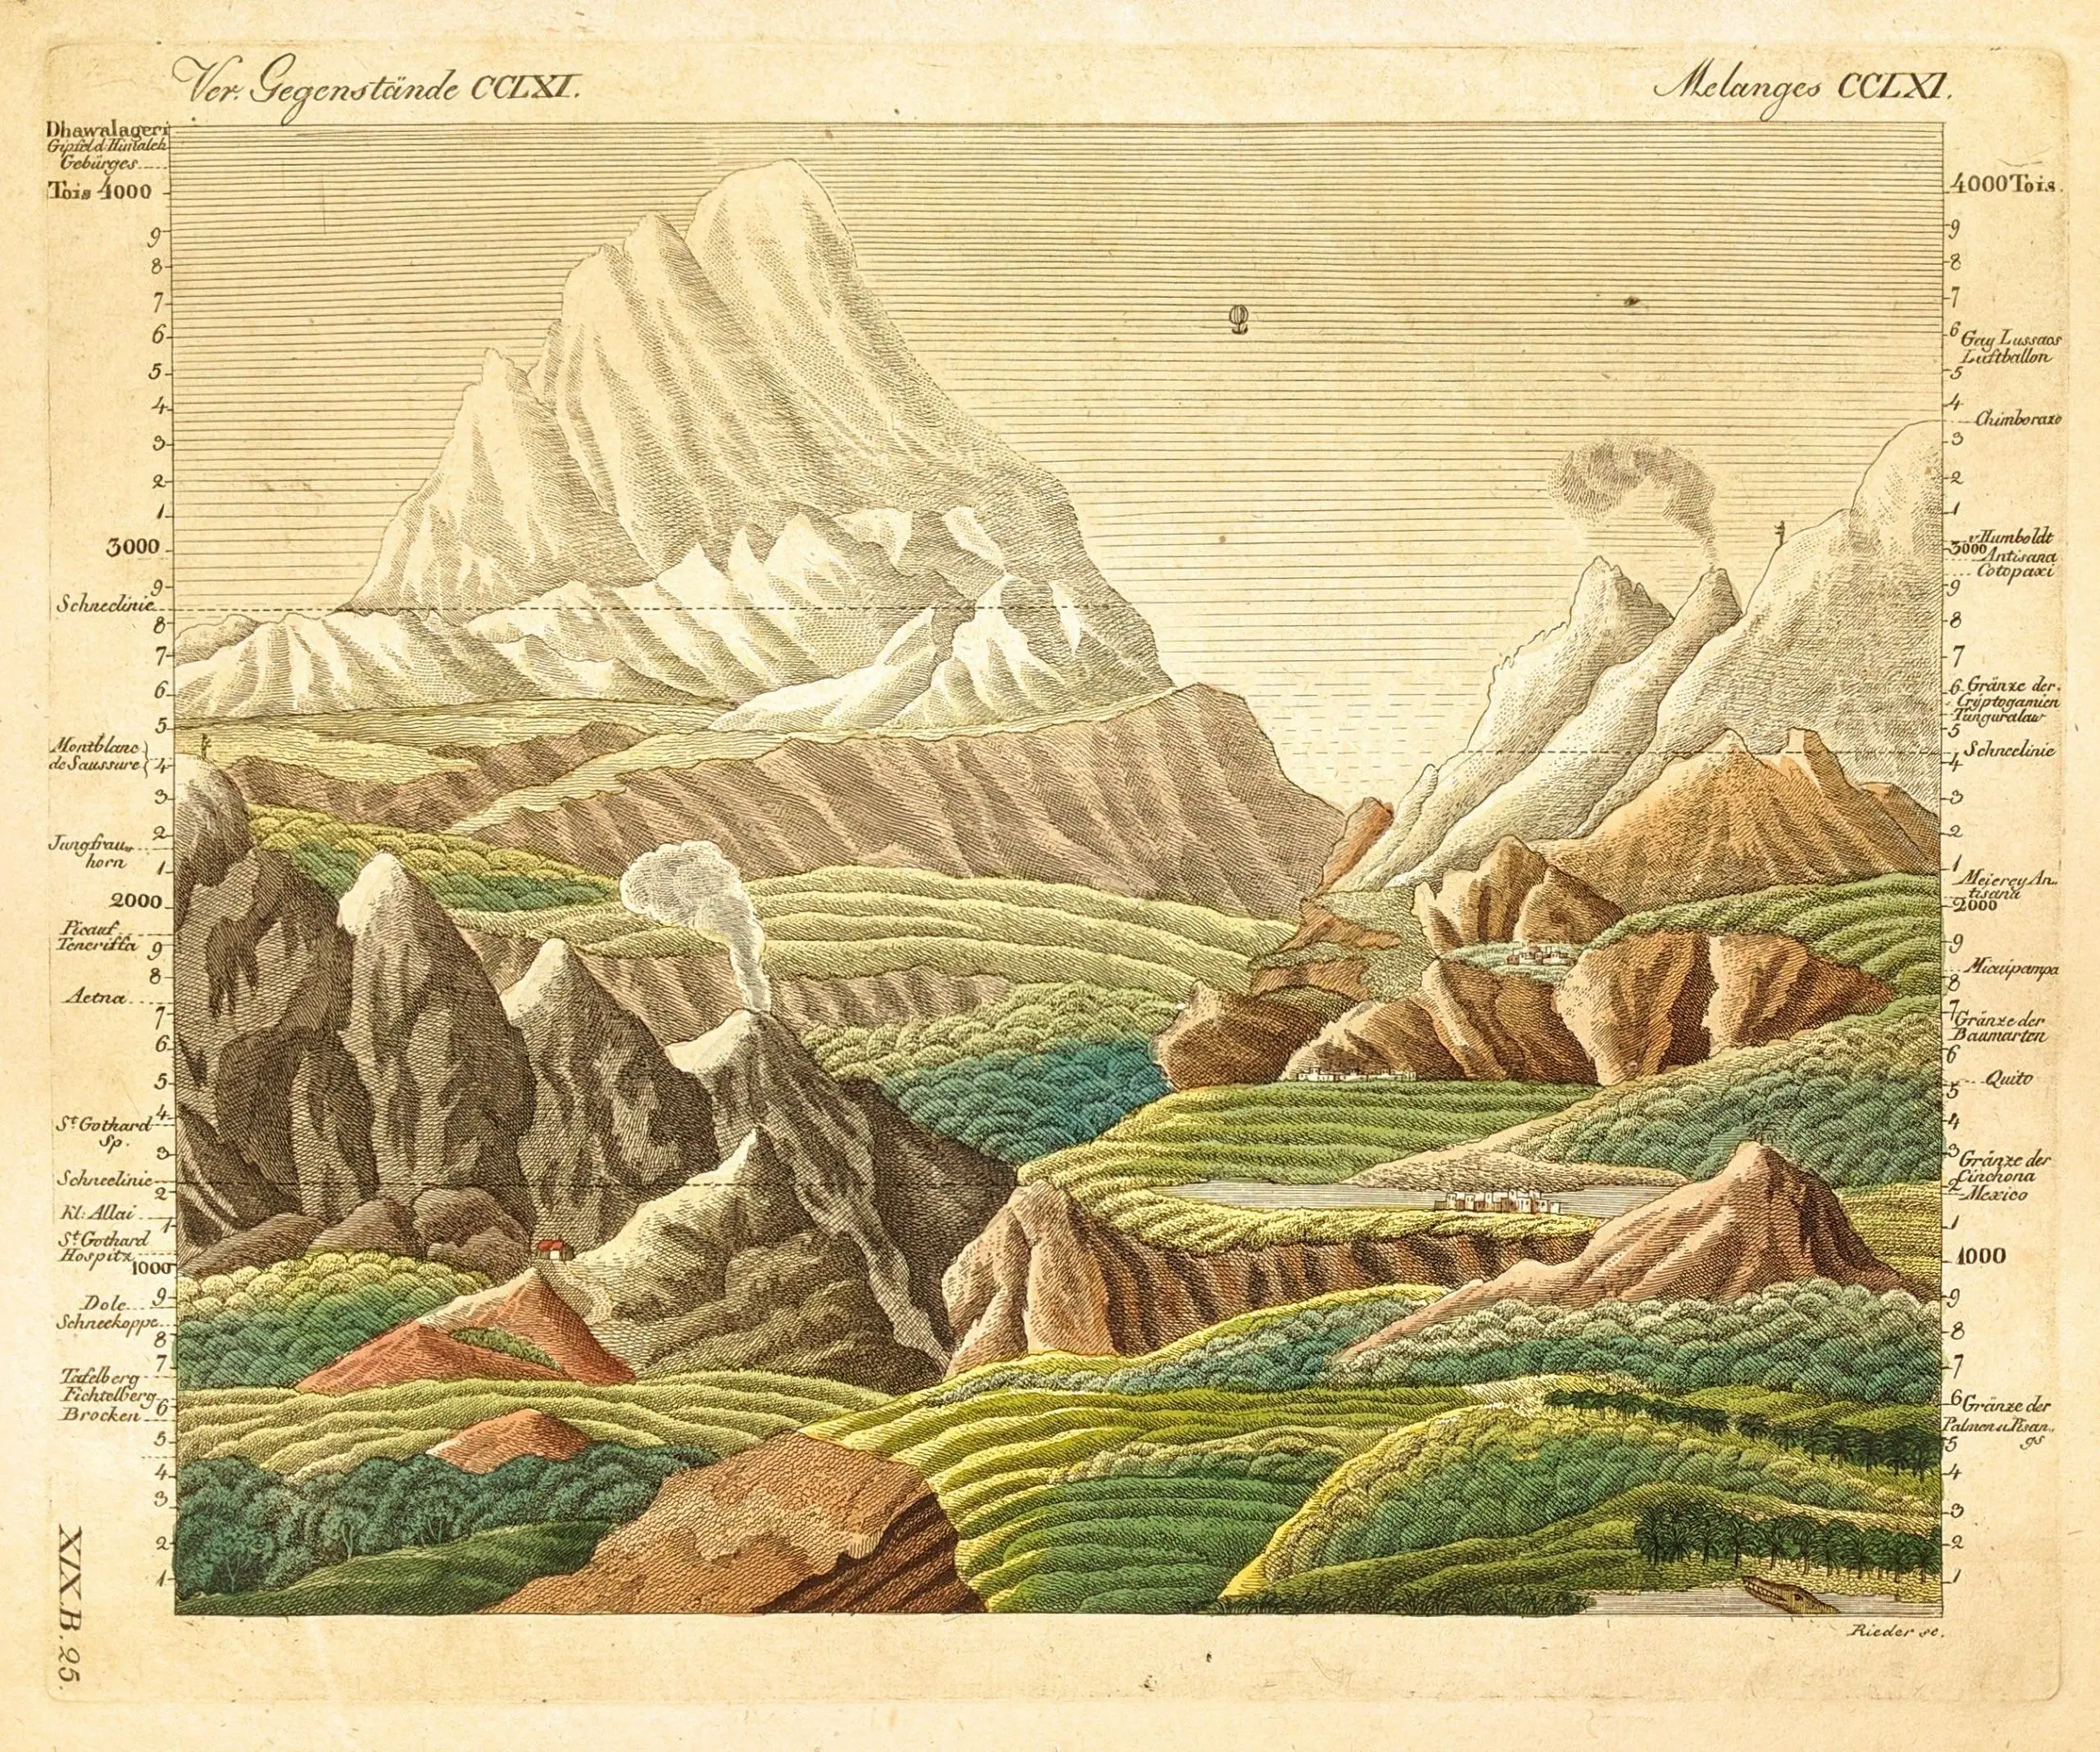 A drawing of different landscapes from Alexander von Humboldt